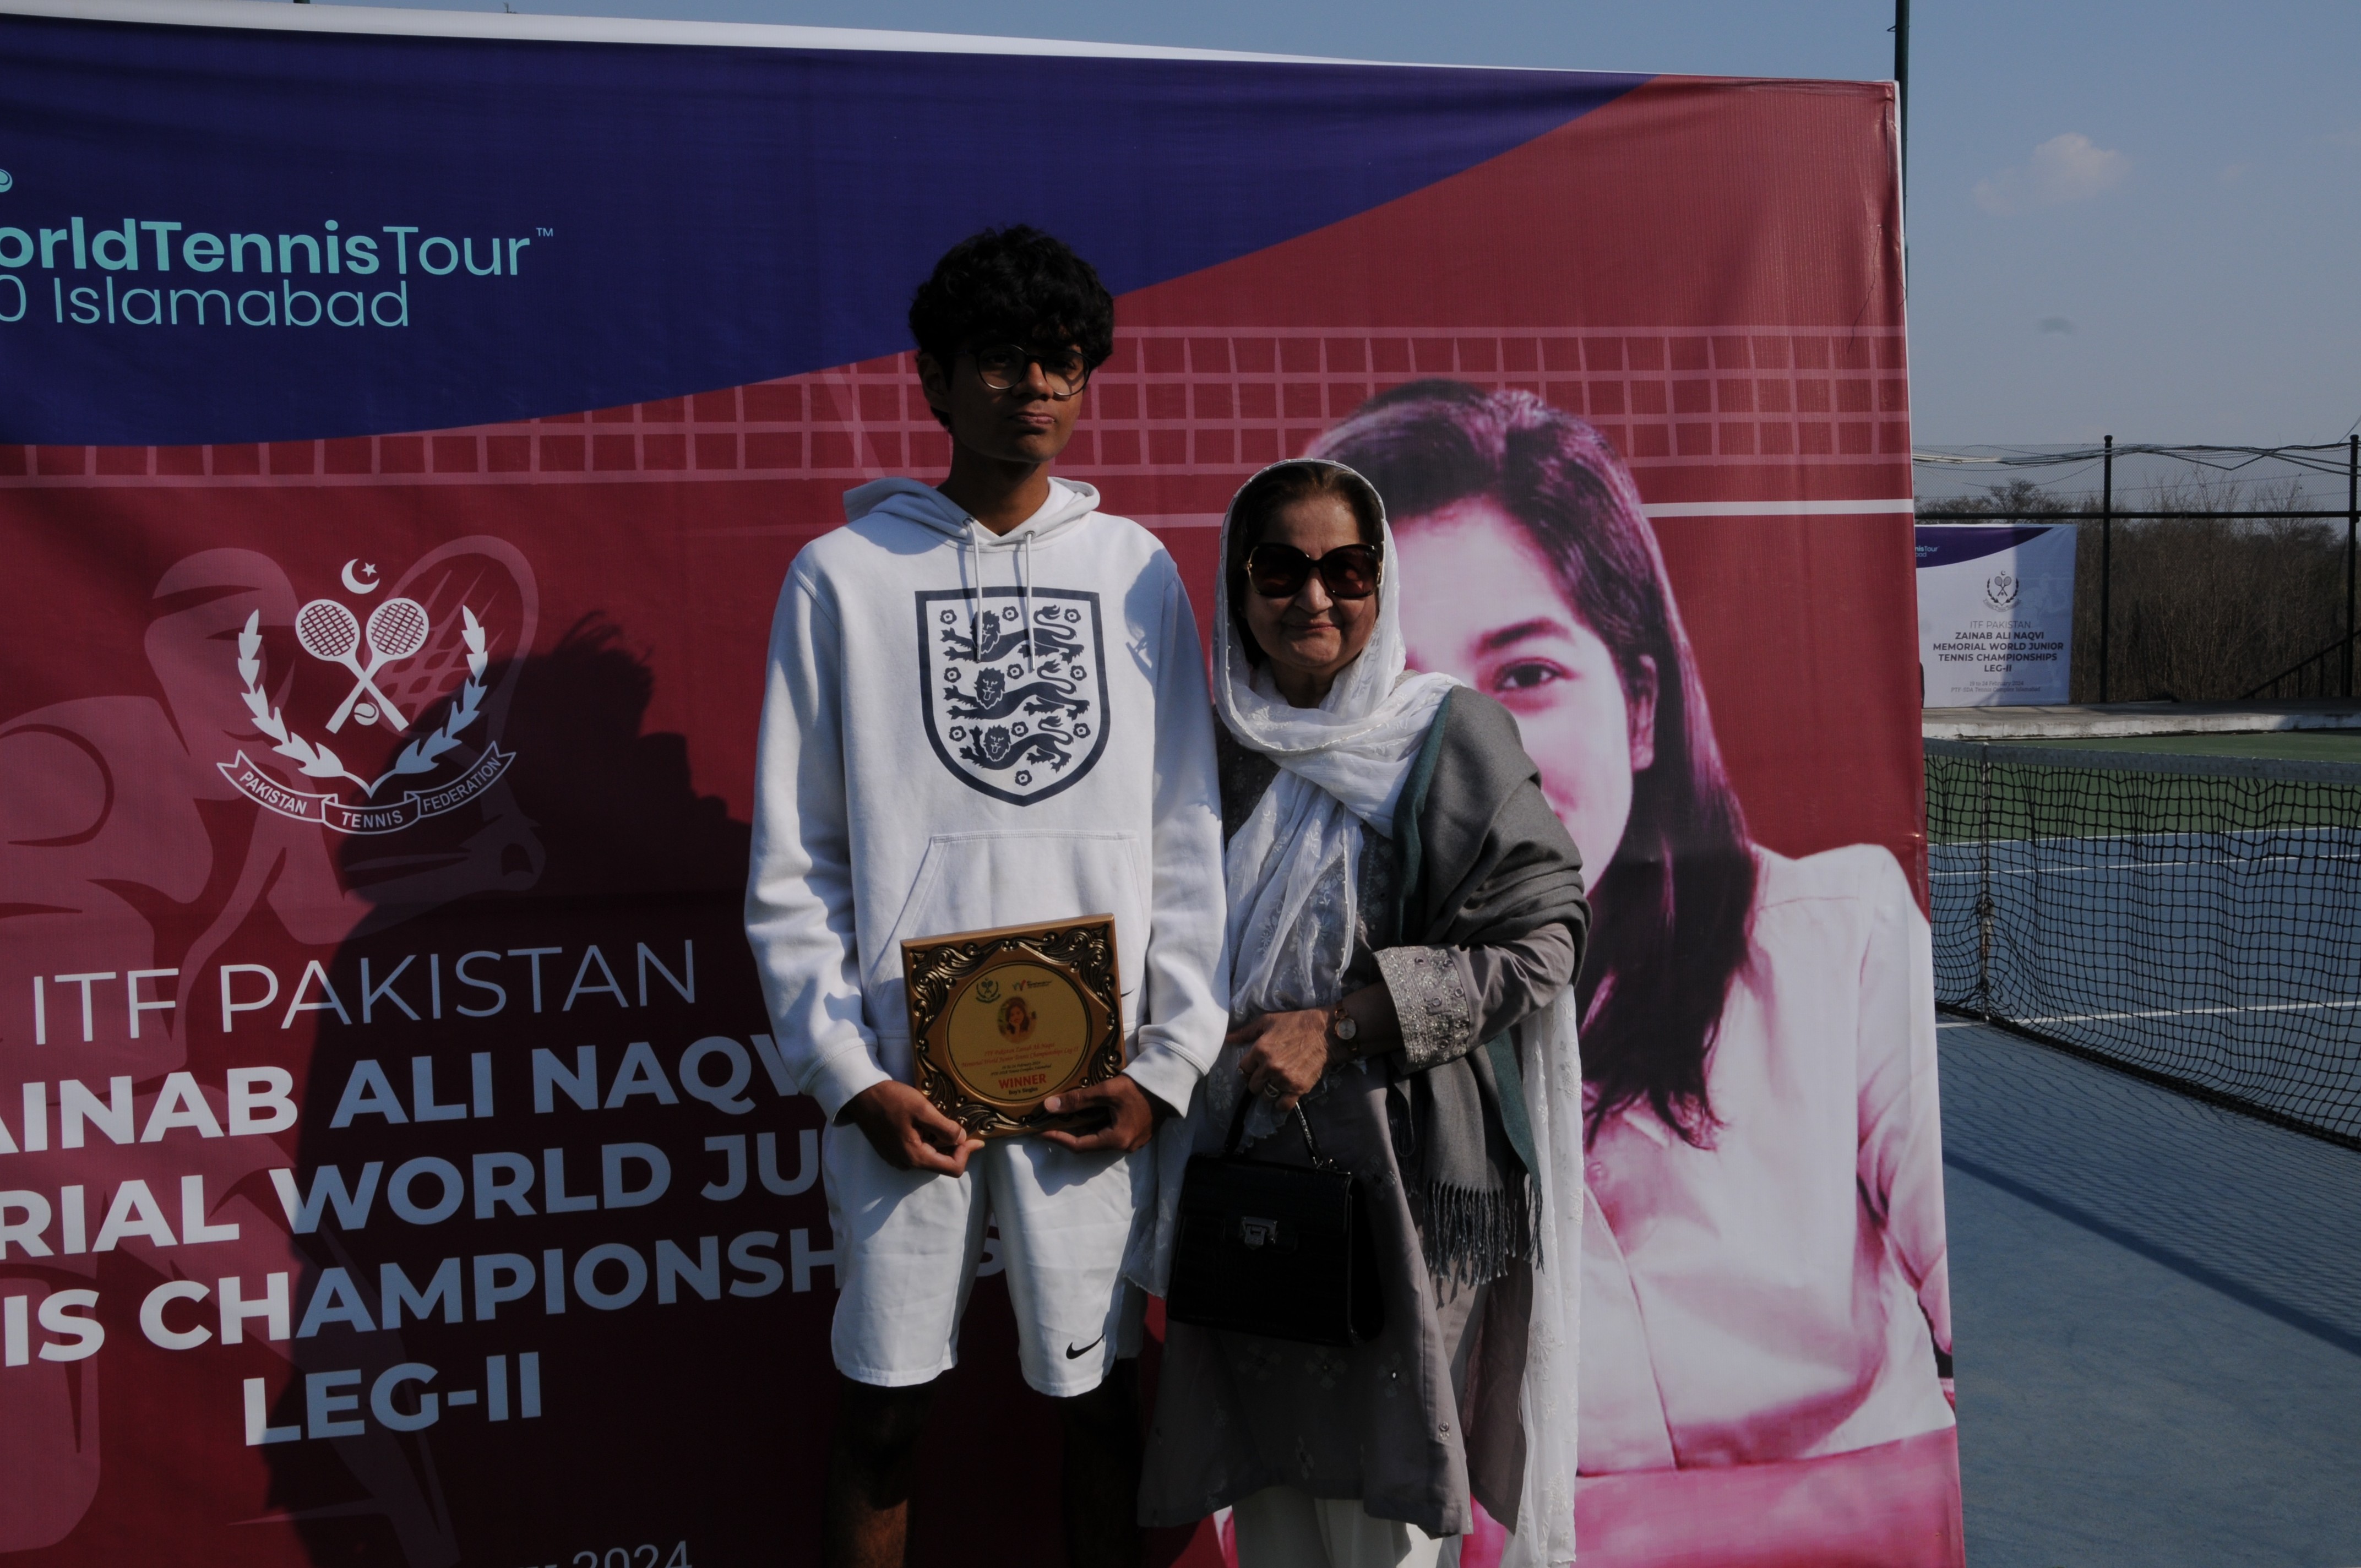 A winning tennis player along with his mother posing with his trophy